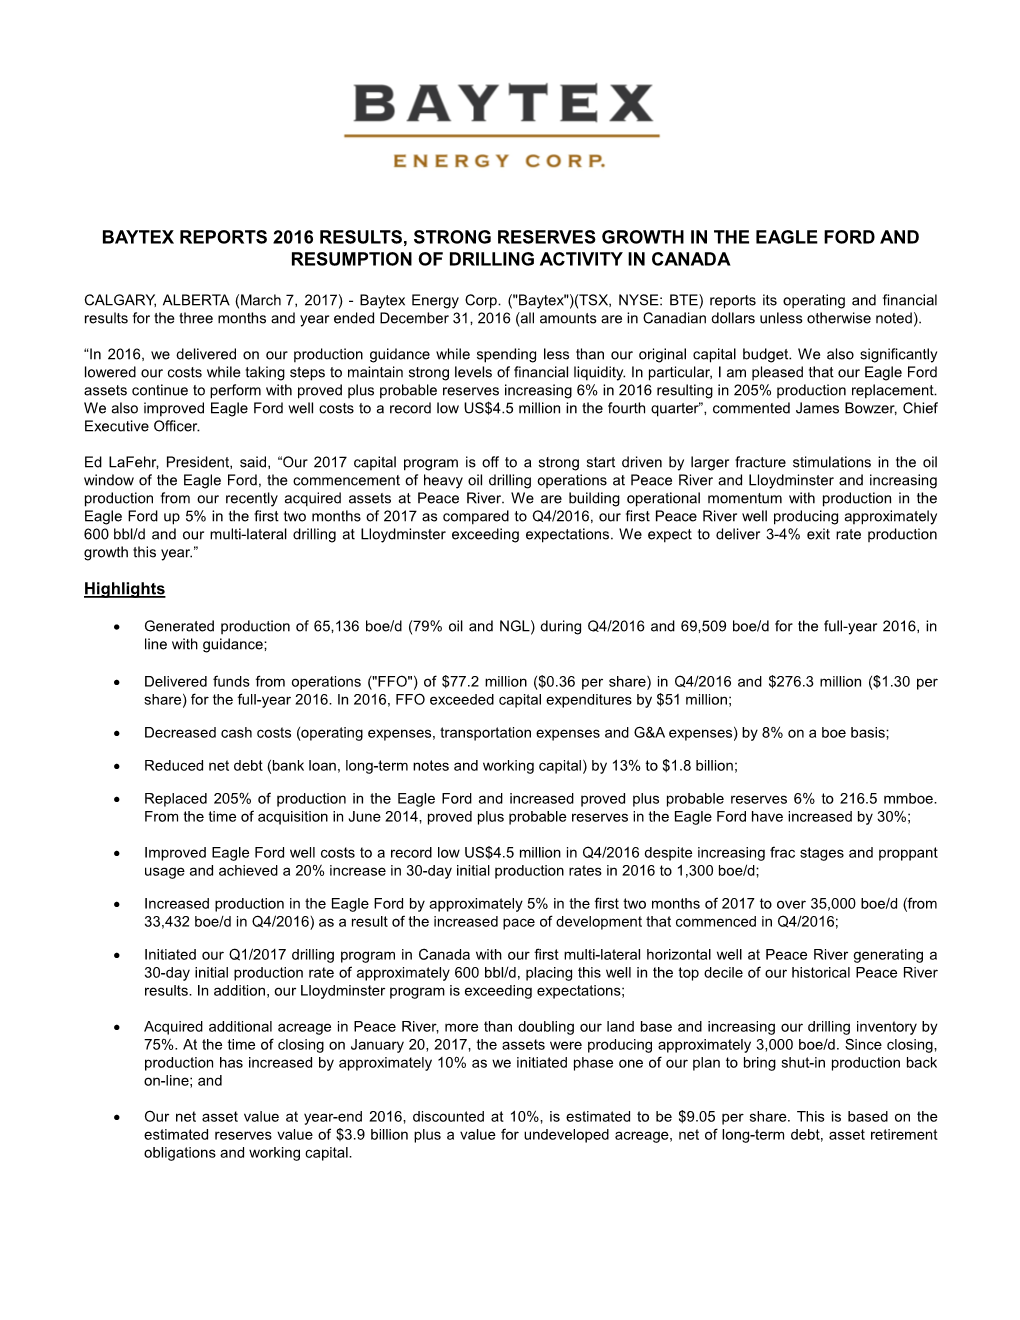 Baytex Reports 2016 Results, Strong Reserves Growth in the Eagle Ford and Resumption of Drilling Activity in Canada